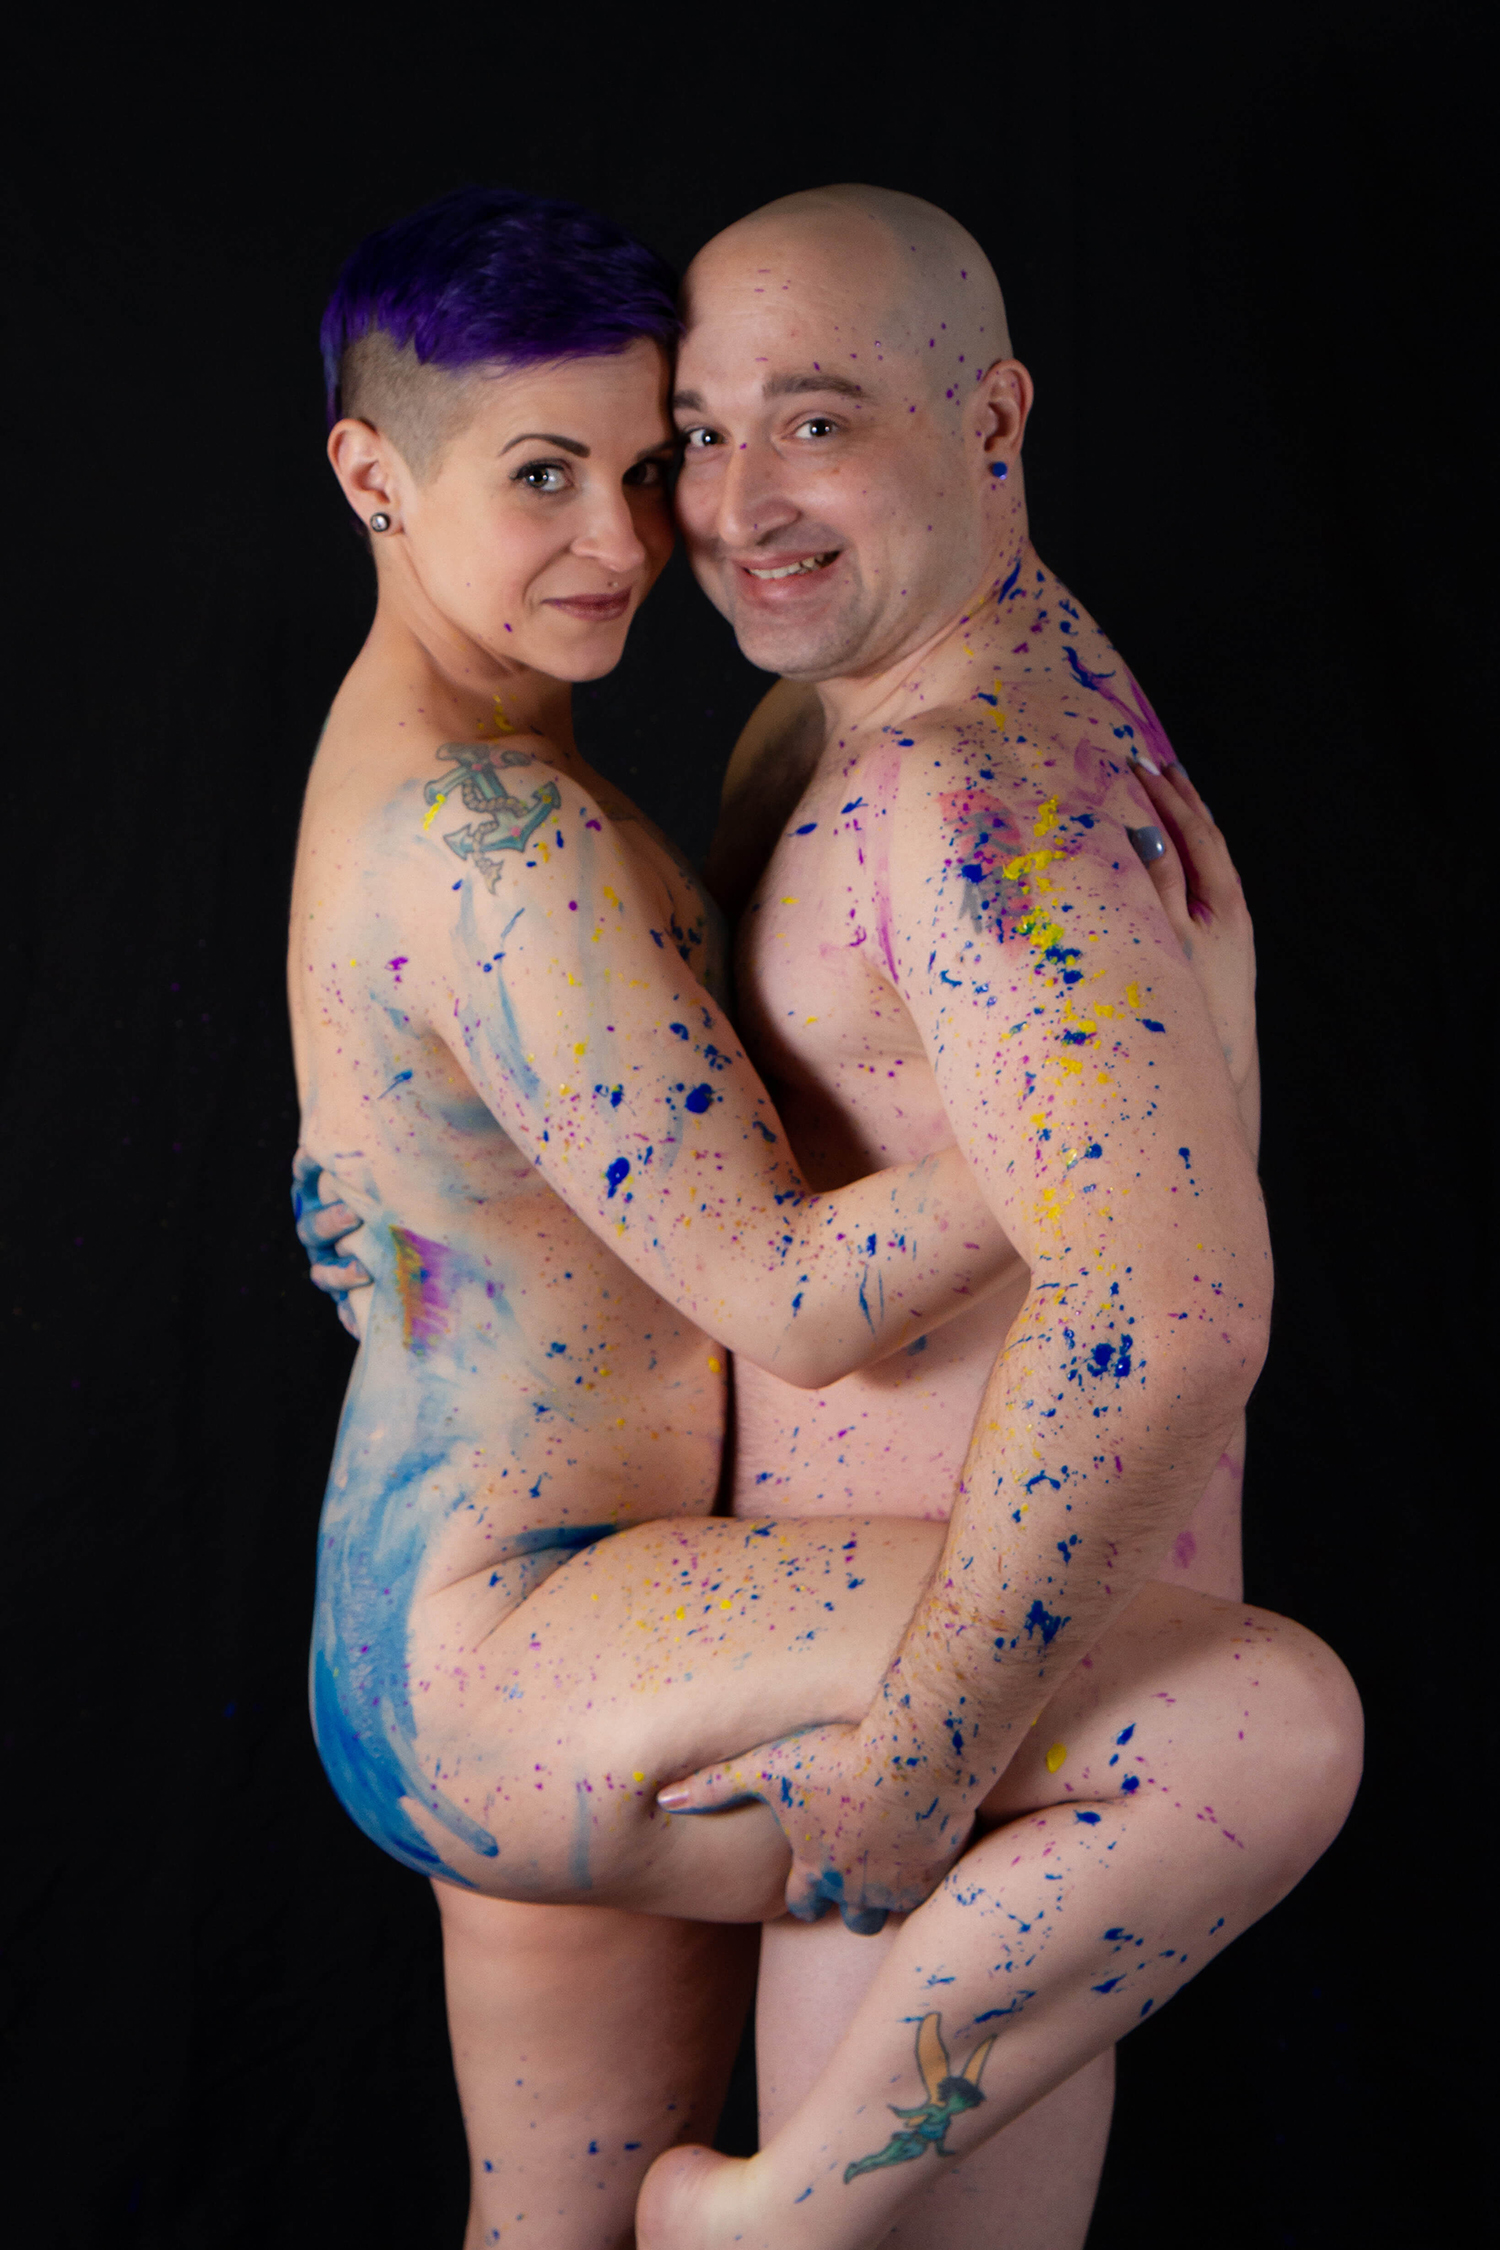 Couples Boudoir a man and a woman, nude, are covered in paint spatter, embracing chest to chest, arms around one another, smiling at the camera